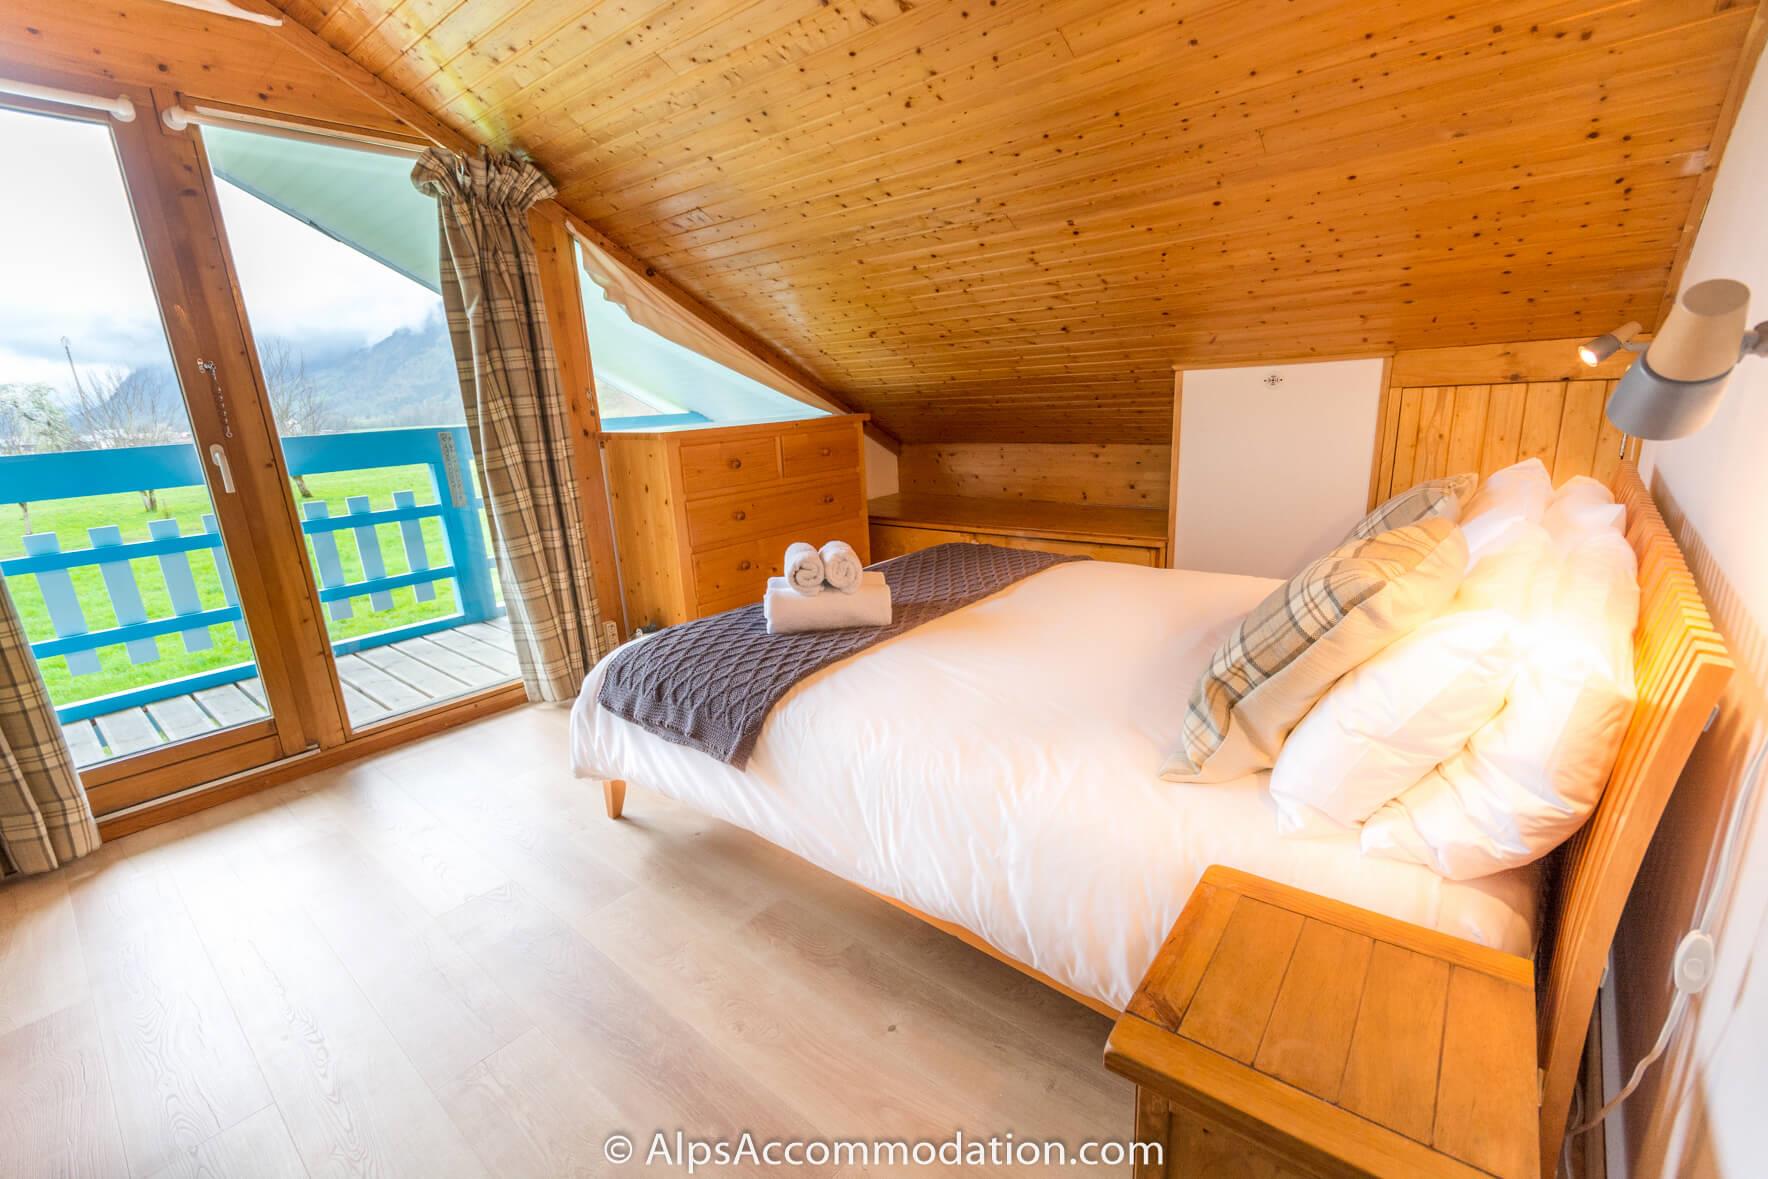 Chalet Bleu Morillon - Ensuite king bedroom on the upper level offering stunning views from its balcony